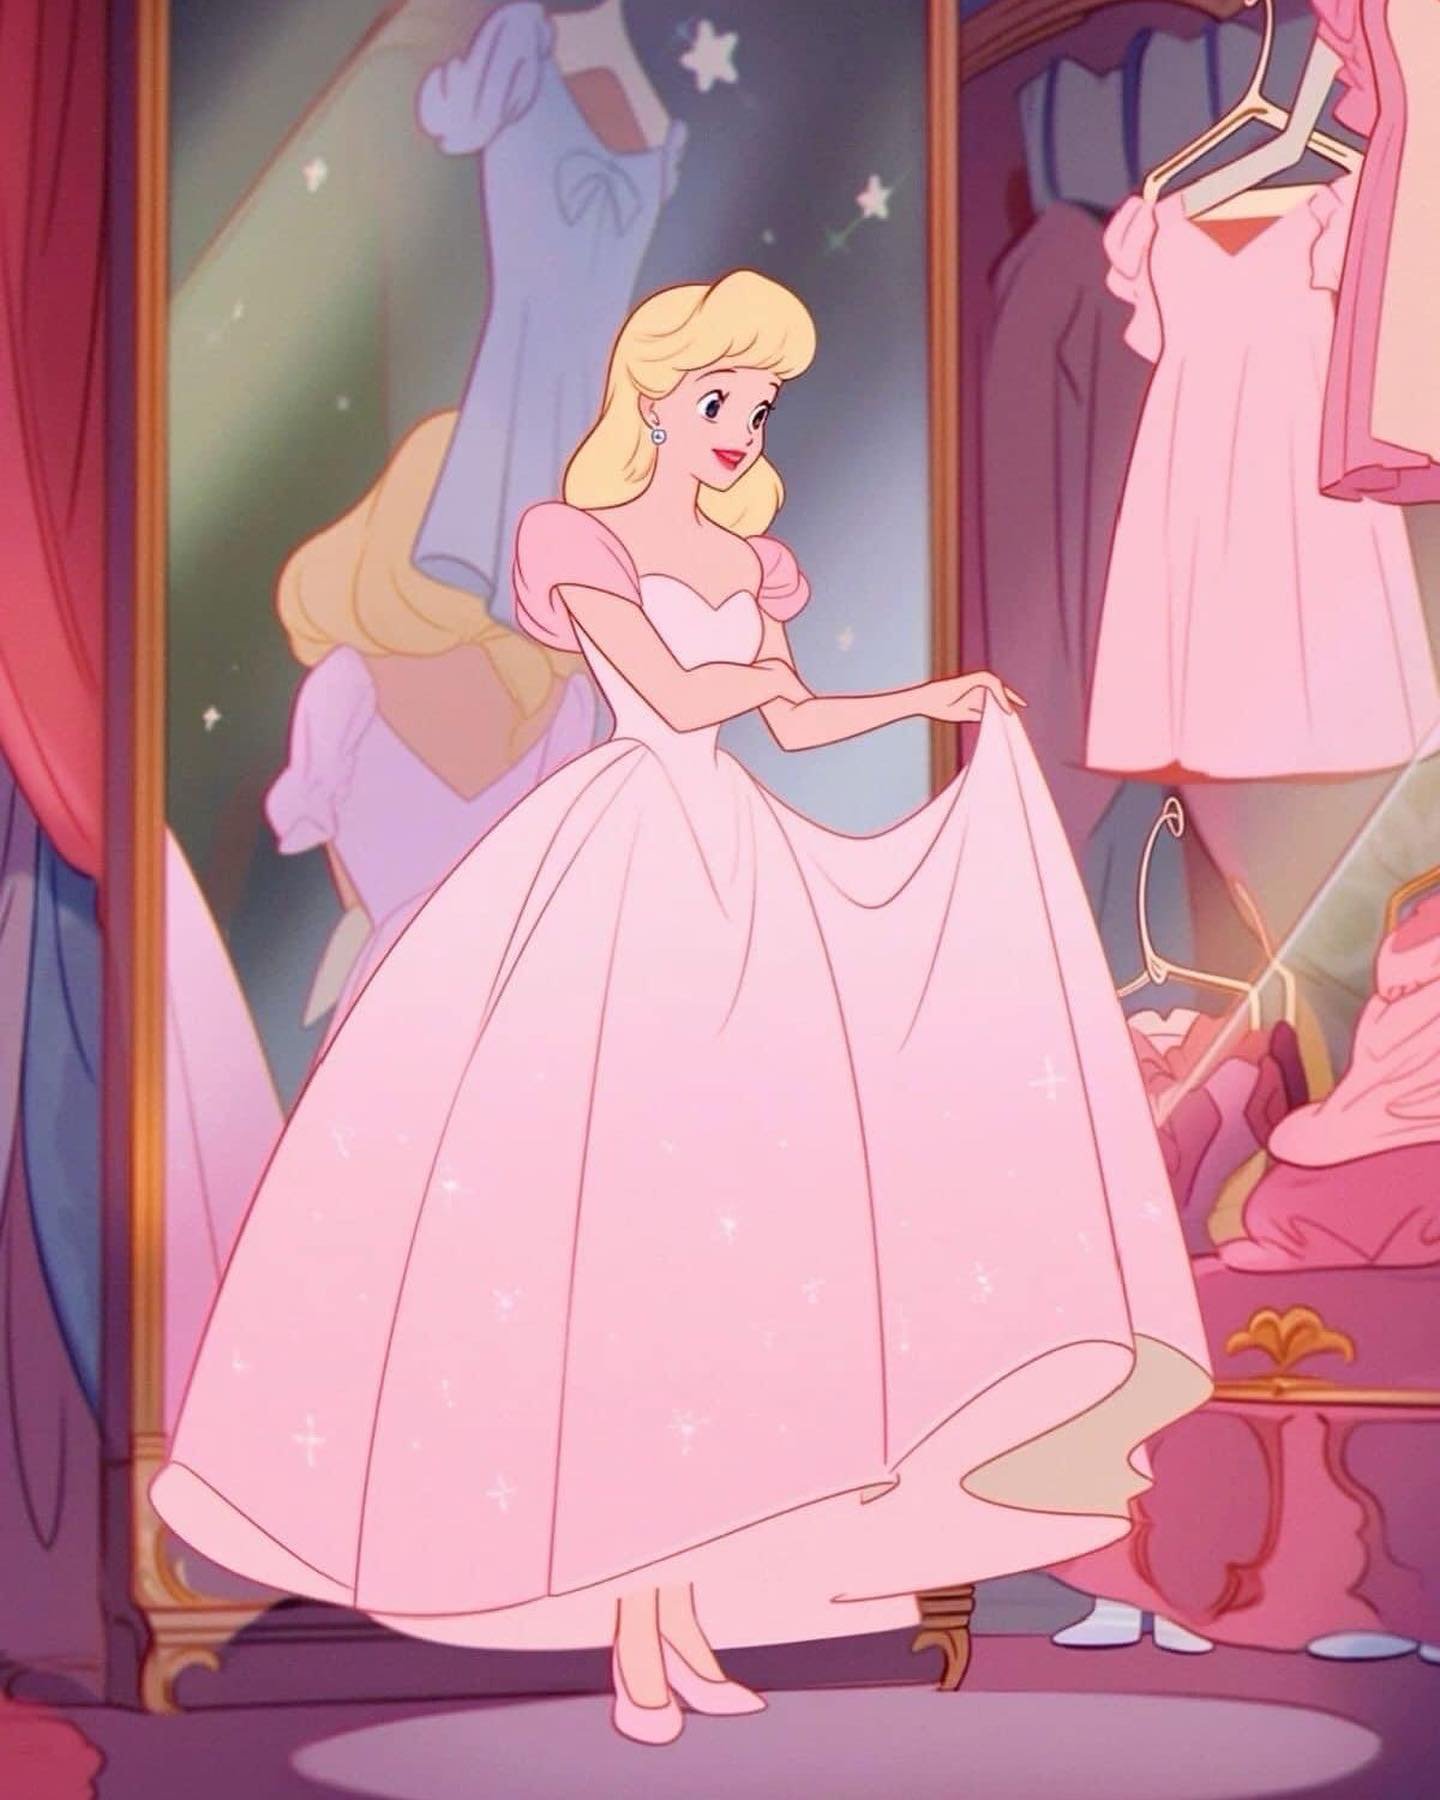 Me when I have a new dress. 🥰🥰🥰
.
#margaritabloom #outfit #princess #fairytale #dreamcometrue #dress #pink #illustration #aesthetic #mystyle #fashion #princessdress #pinkdress #prettyaesthetic #prettythings #princesscore #shabbychic #coquette #moo